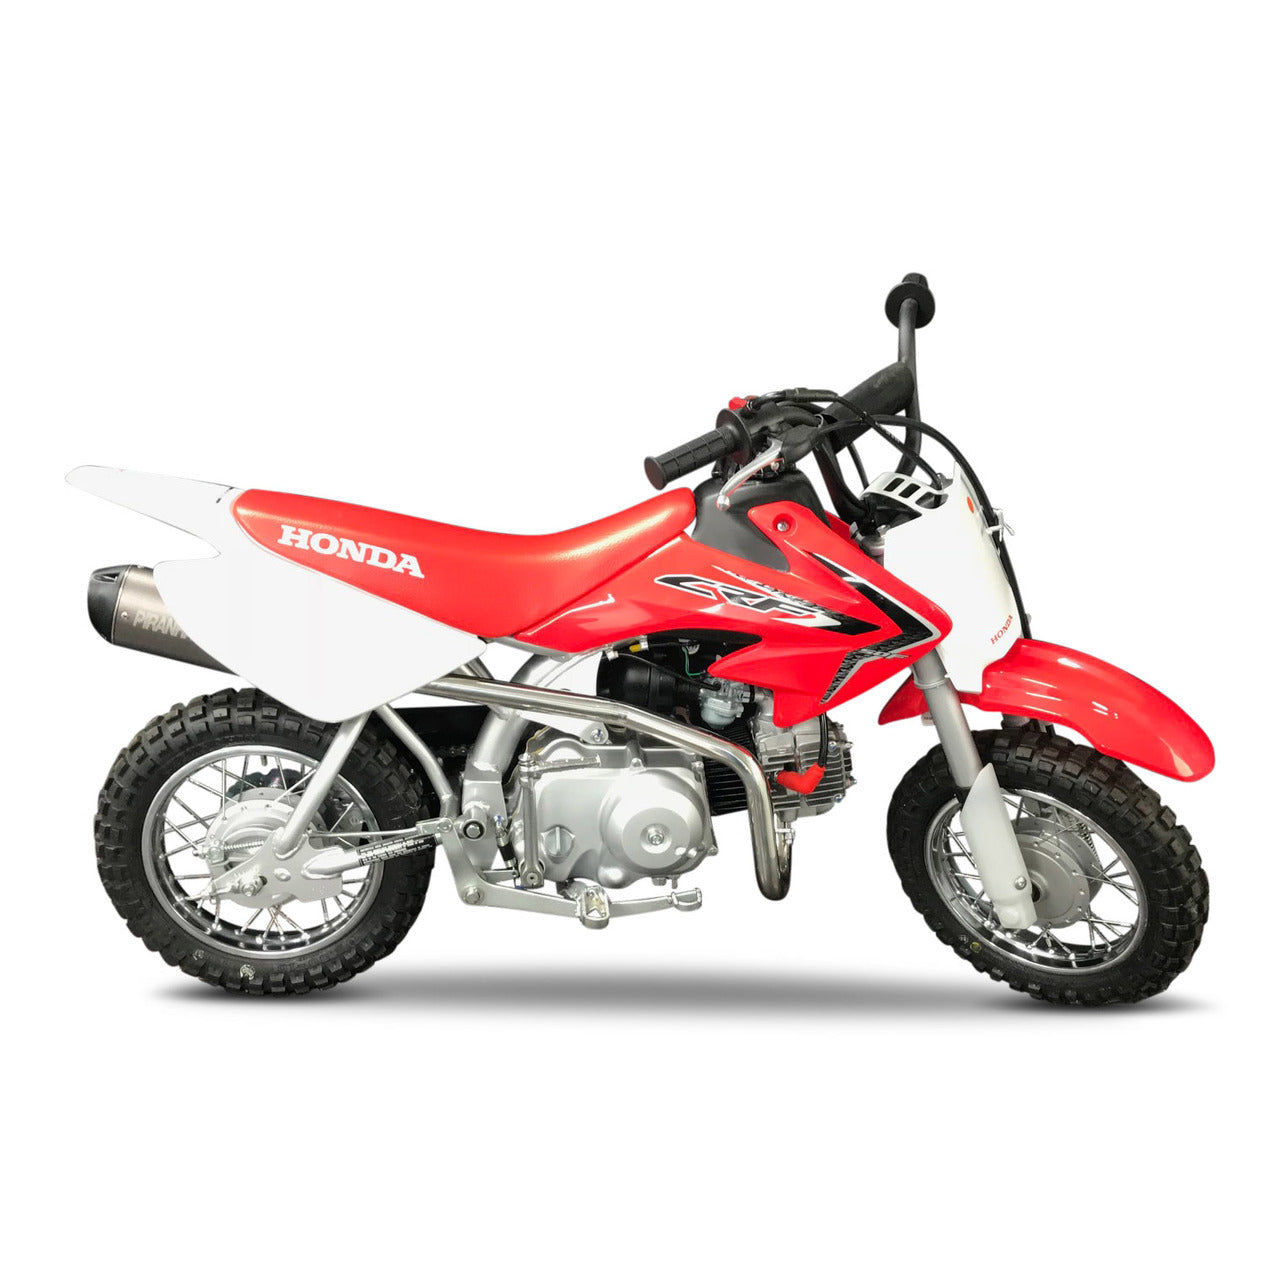 PIRANHA - FULL EXHAUST SYSTEM FOR CRF50